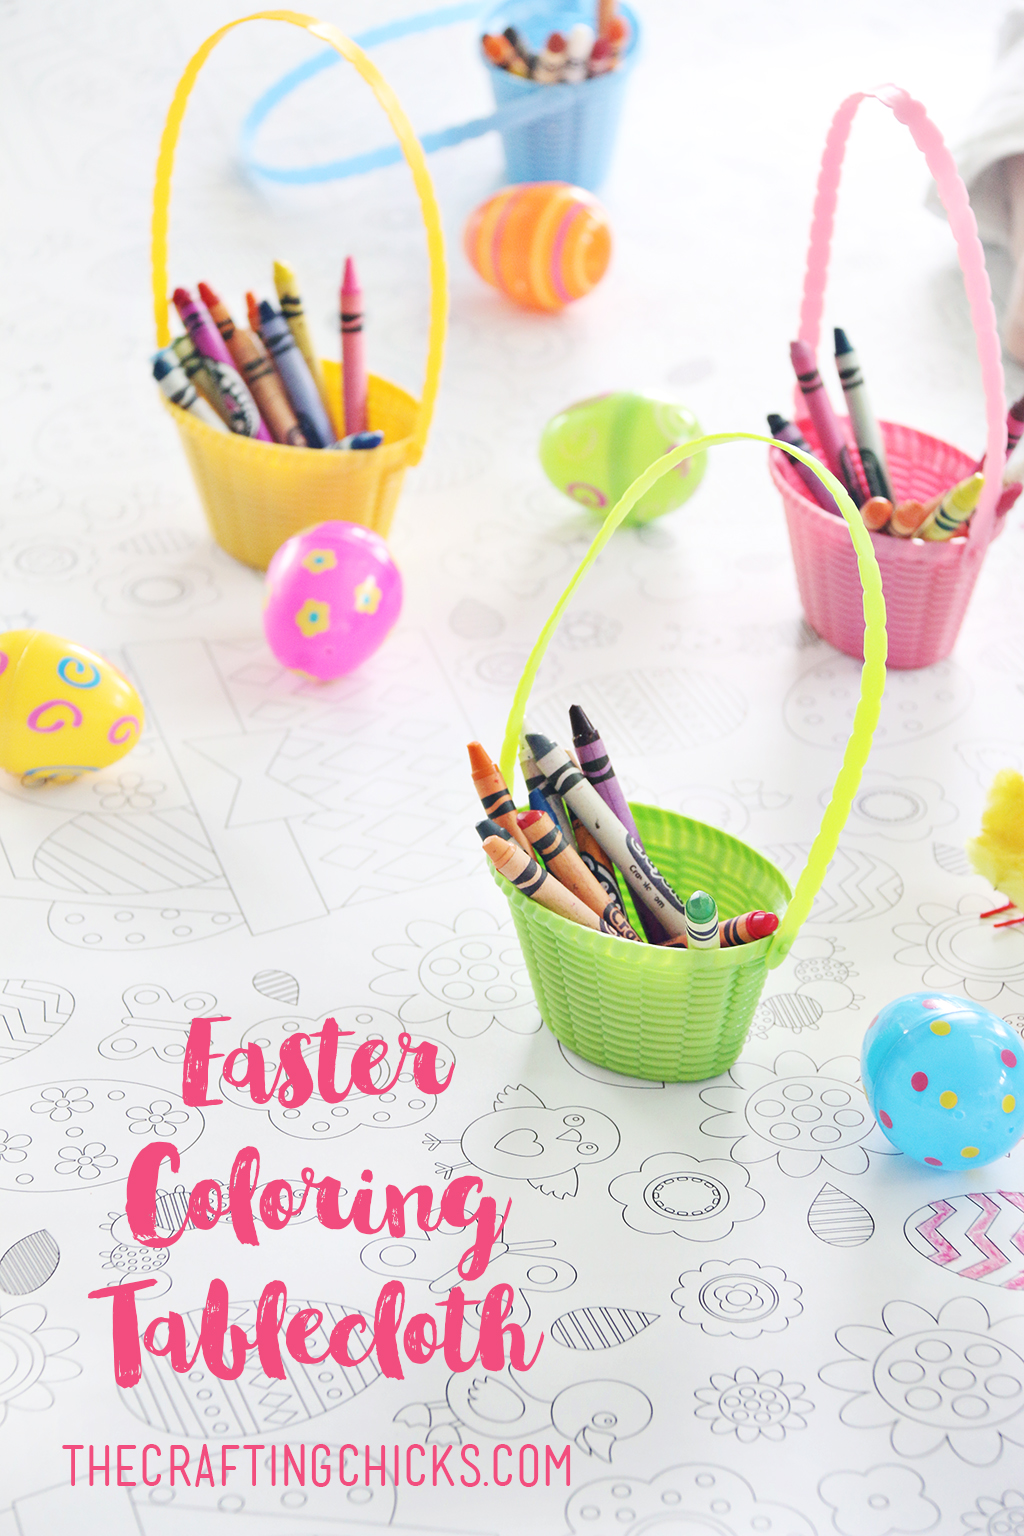 Printable Easter Coloring Tablecloth - Make your Easter dinner lots of fun for the kids with our Easter Coloring Tablecloth. This will be a hit with everyone in your home.